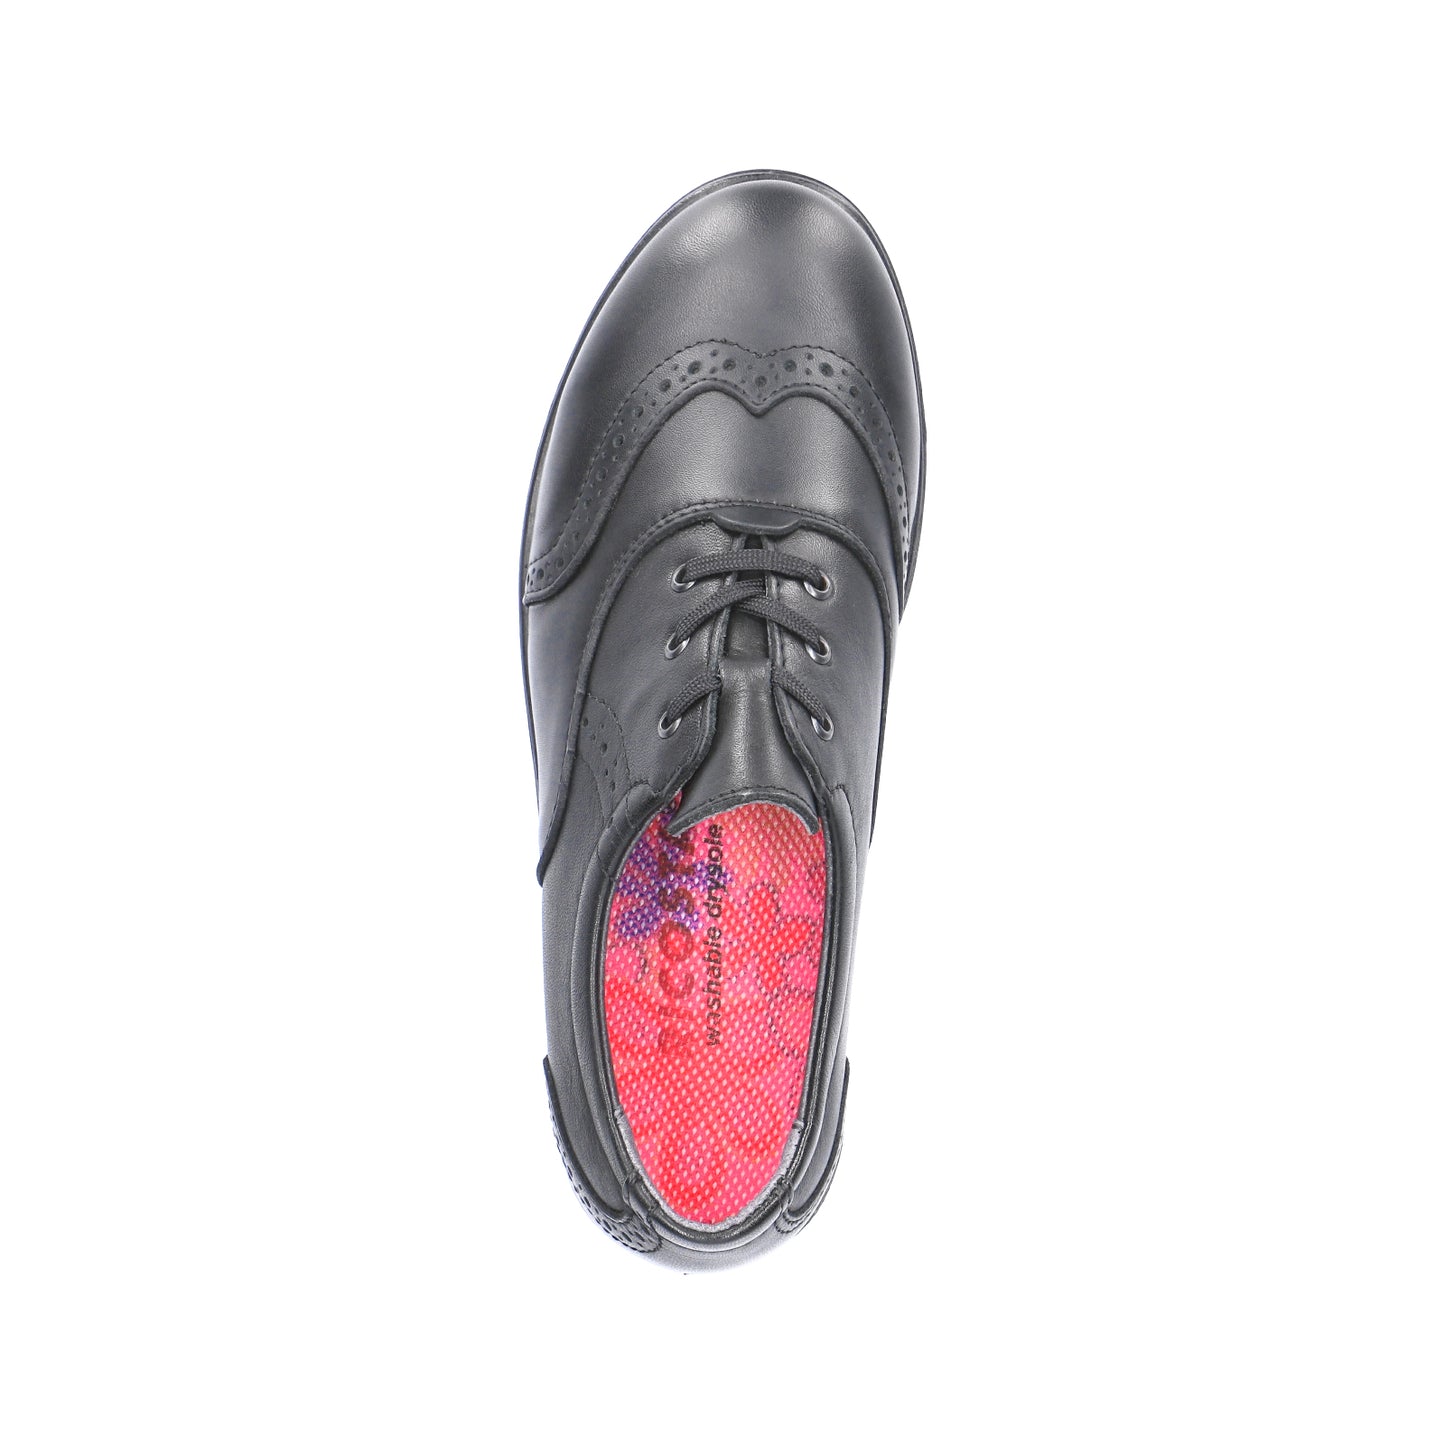 Lucy Black Leather Lace-up Girls School Shoe.